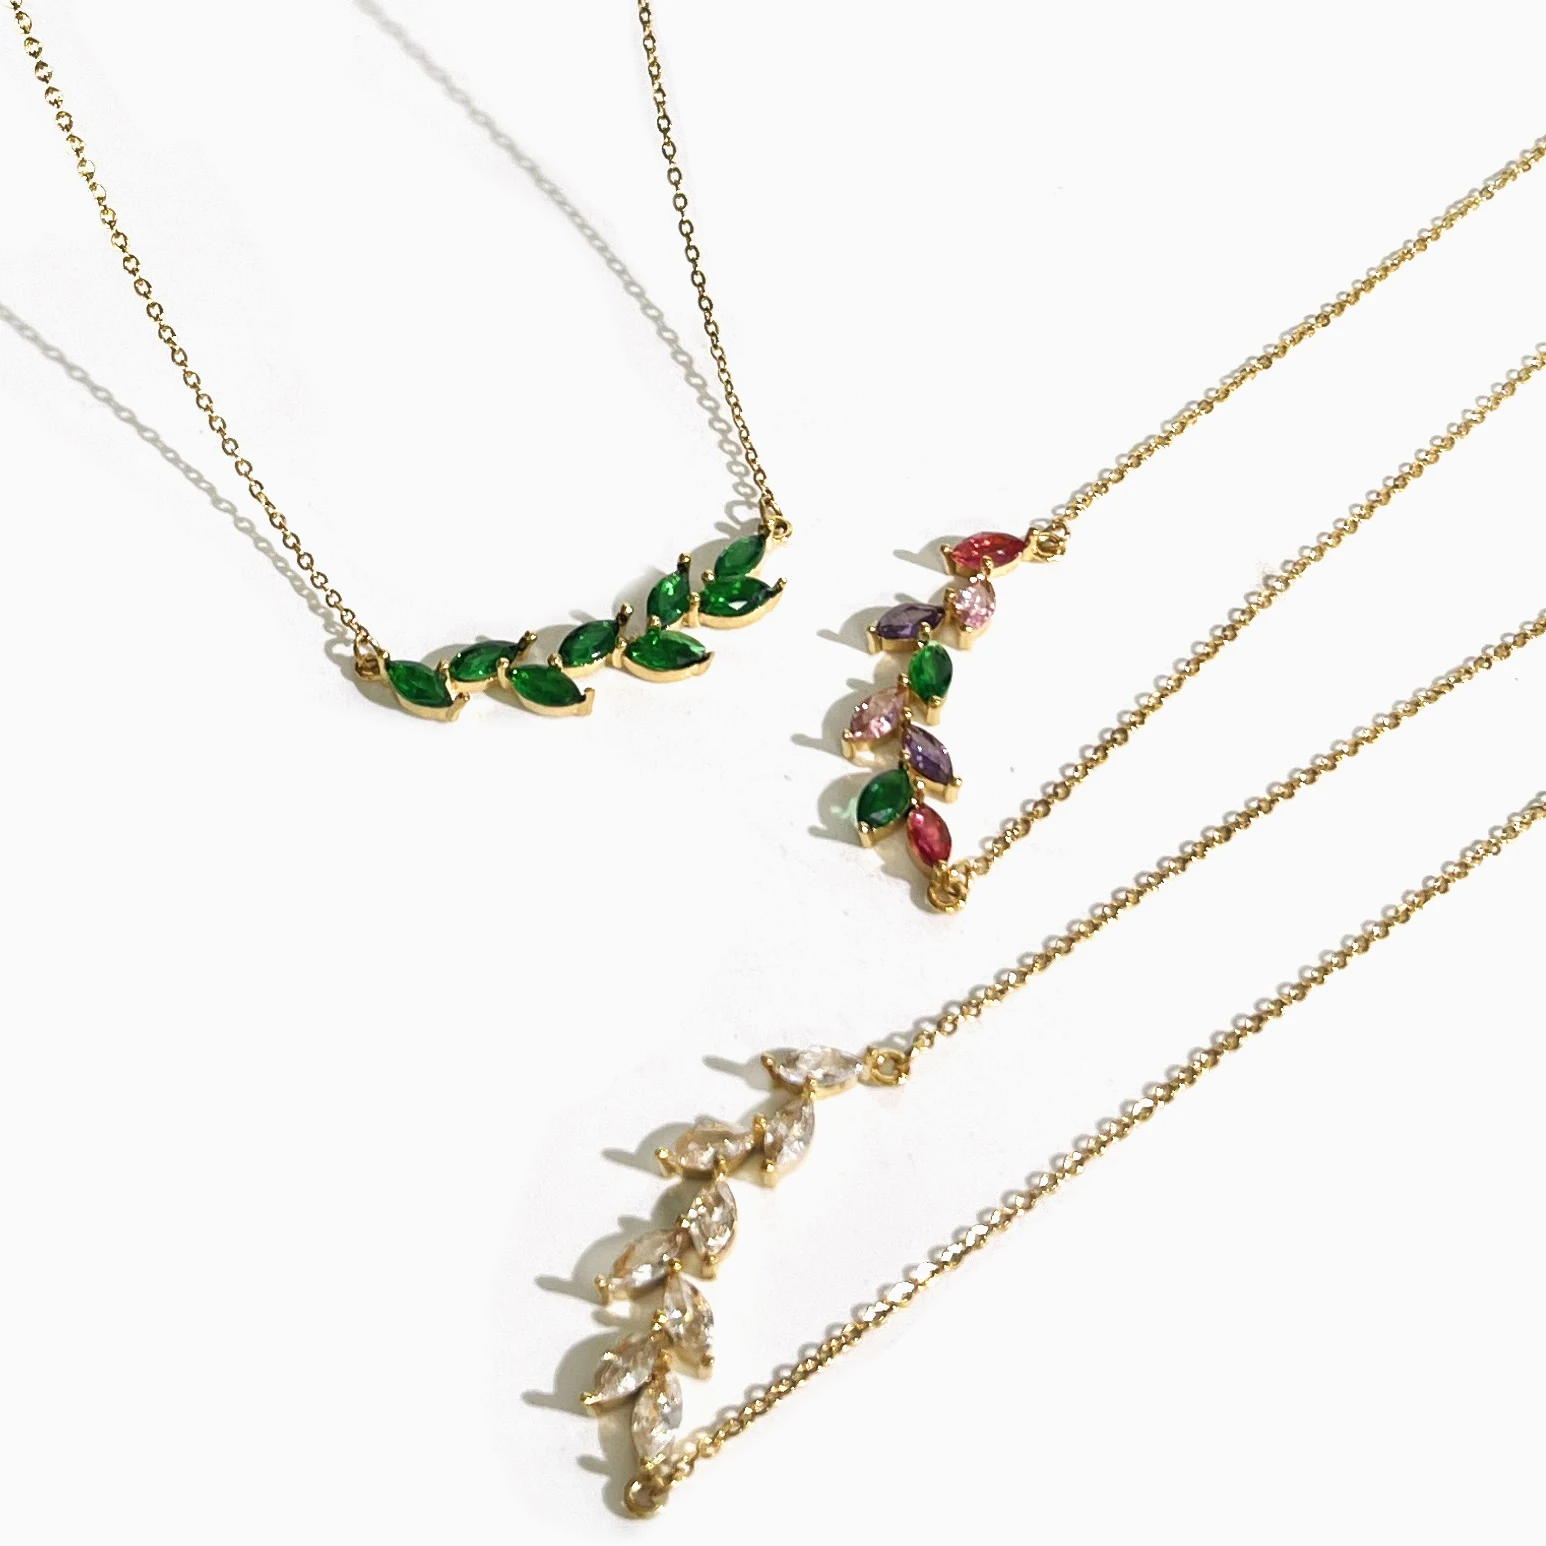 

Peri'sbox 316L Stainless Steel 18K Gold Pvd Plated Cubic Zirconia Olive Leaf Necklace Women Dainty Plant Jewelry Bridesmaid Gift